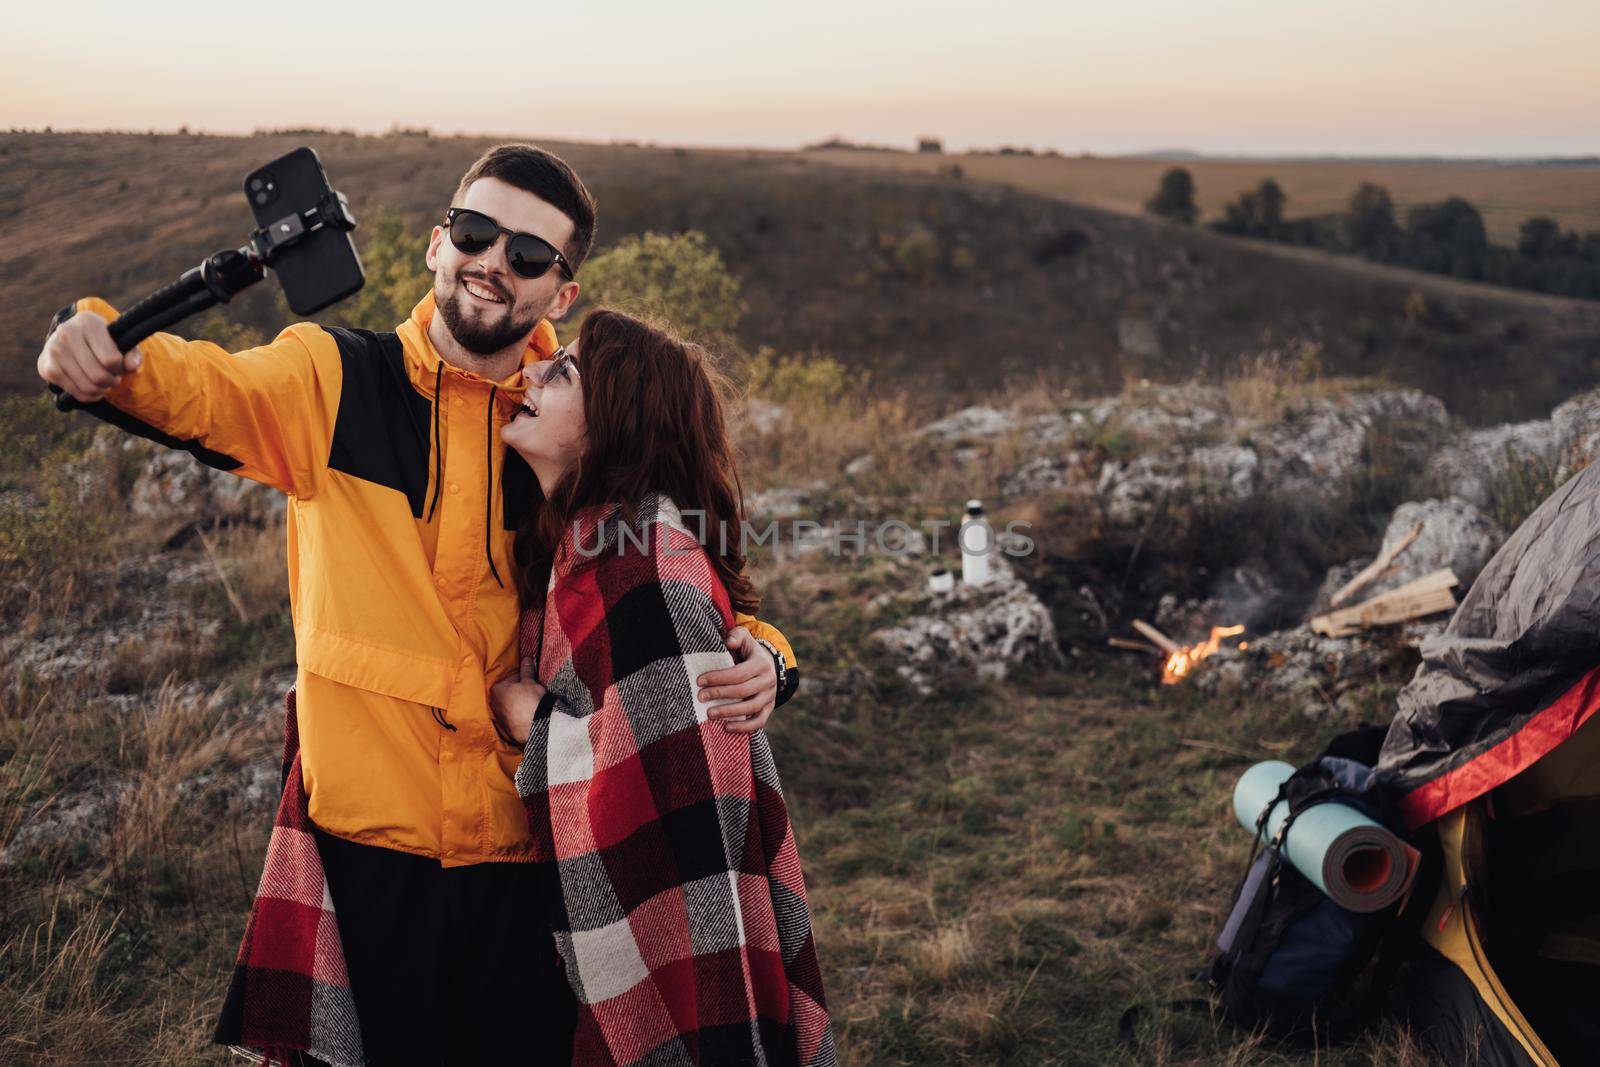 Young Traveler Couple Making Selfie on Top of Hill at Background of Campfire and Tent in Evening